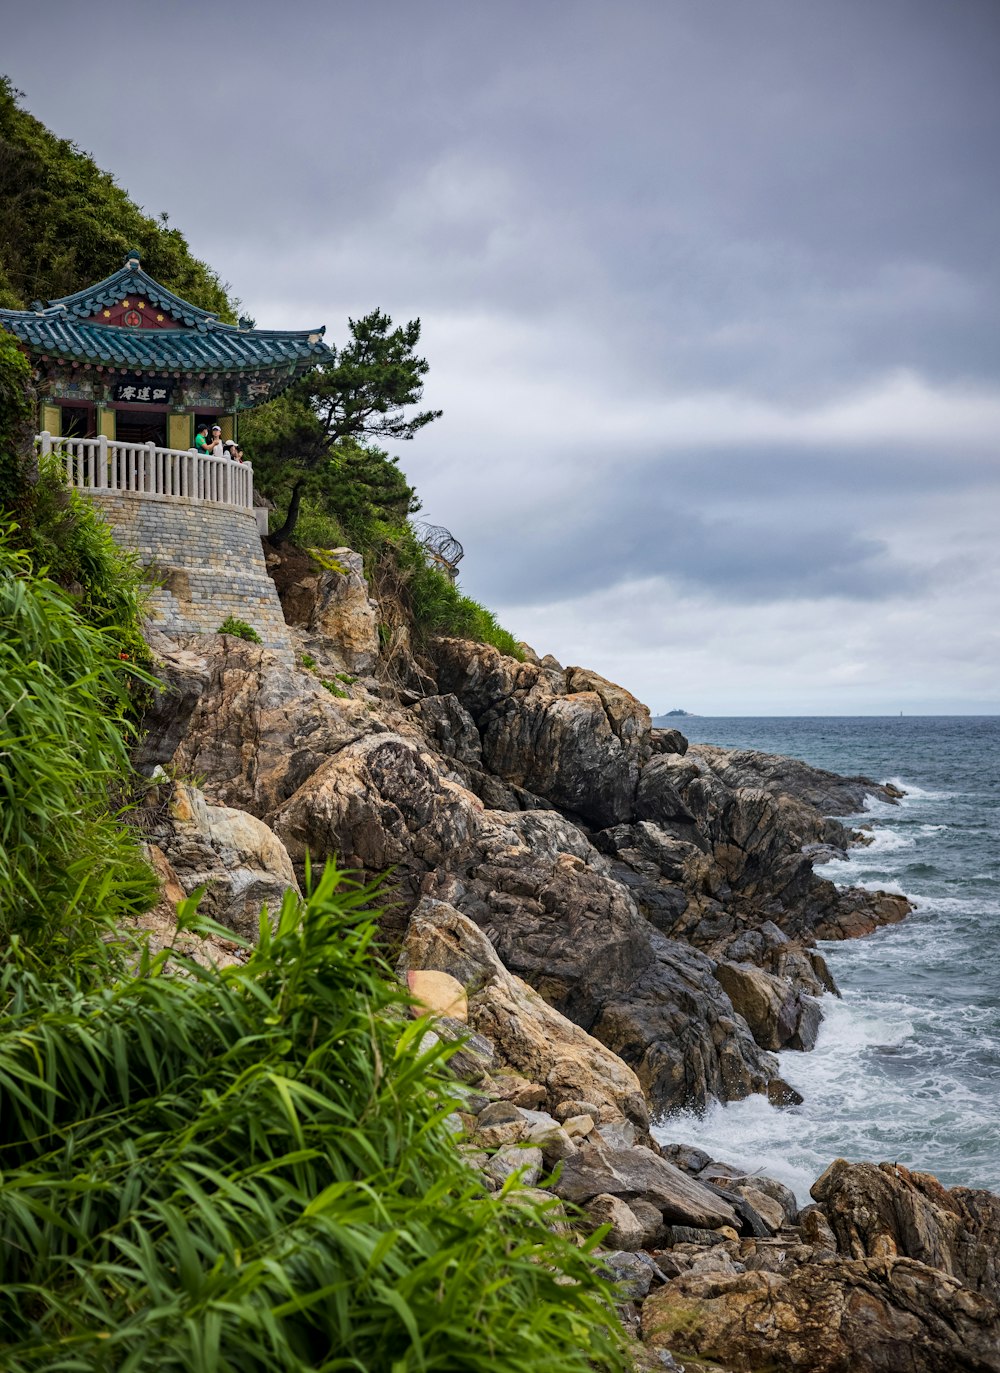 a building on a cliff over the ocean